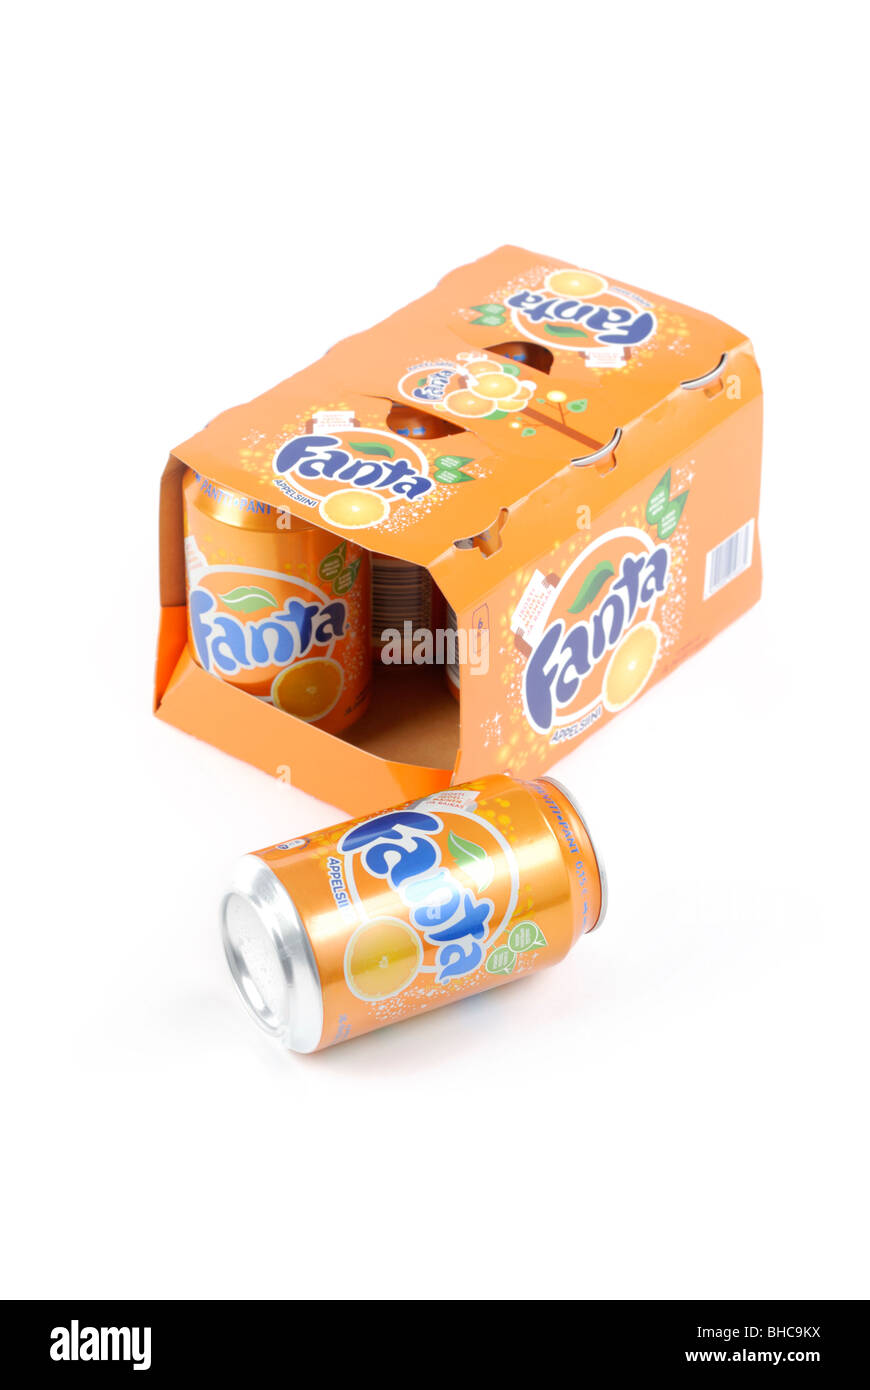 Fanta soft drink cans Stock Photo